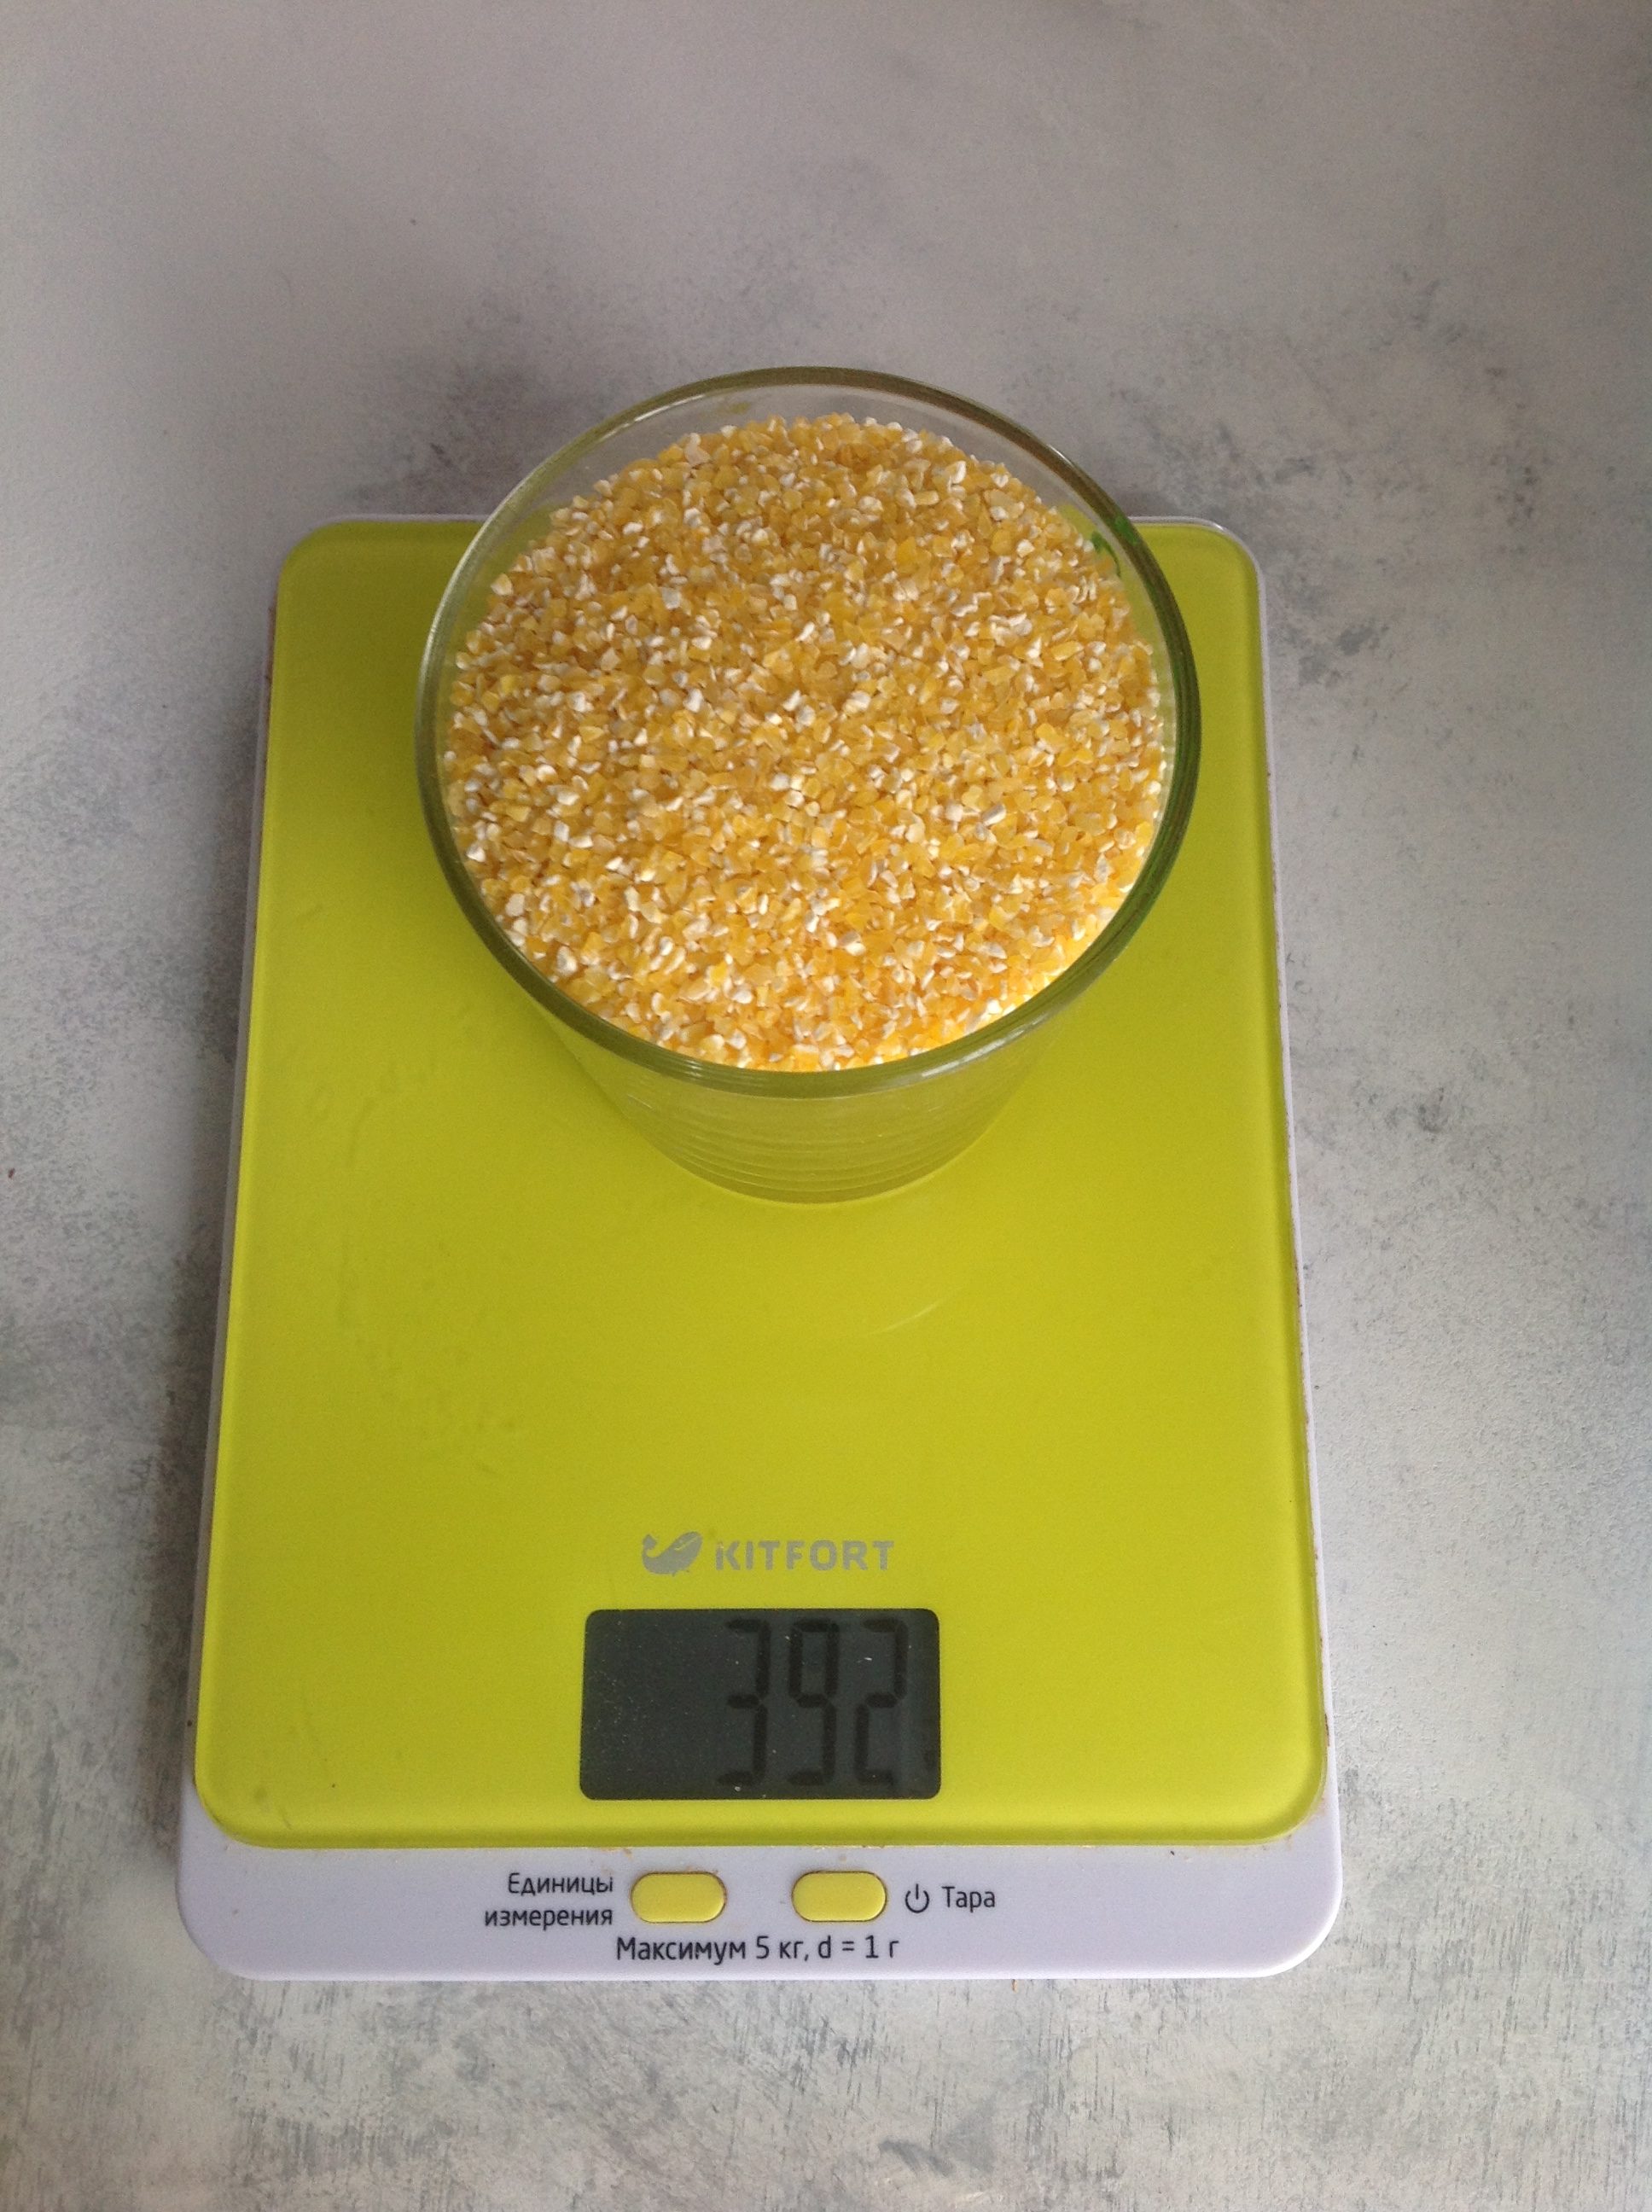 weight of dried cornmeal in a 250 ml glass